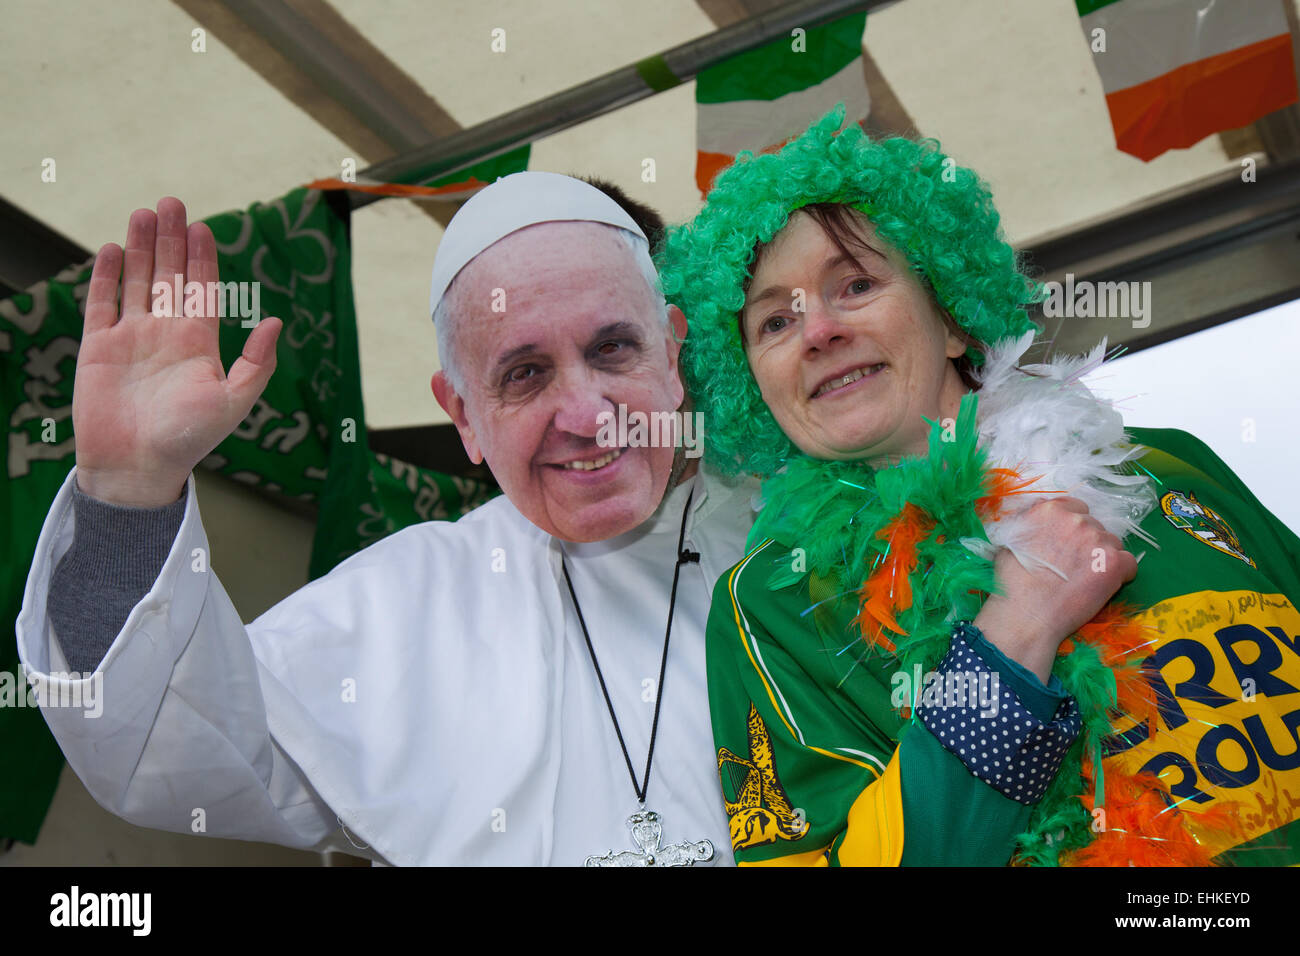 Pope in costume at the St Patrick's weekend Irish Festival.  The Pope and friends at the St Patrick's weekend Irish Festival.  Thousands of people lined the streets to watch as the St Patrick’s Day parade made its way through Manchester.  The colourful procession set off from the Irish World Heritage Centre in Cheetham Hill before making its way to Albert Square. Stock Photo